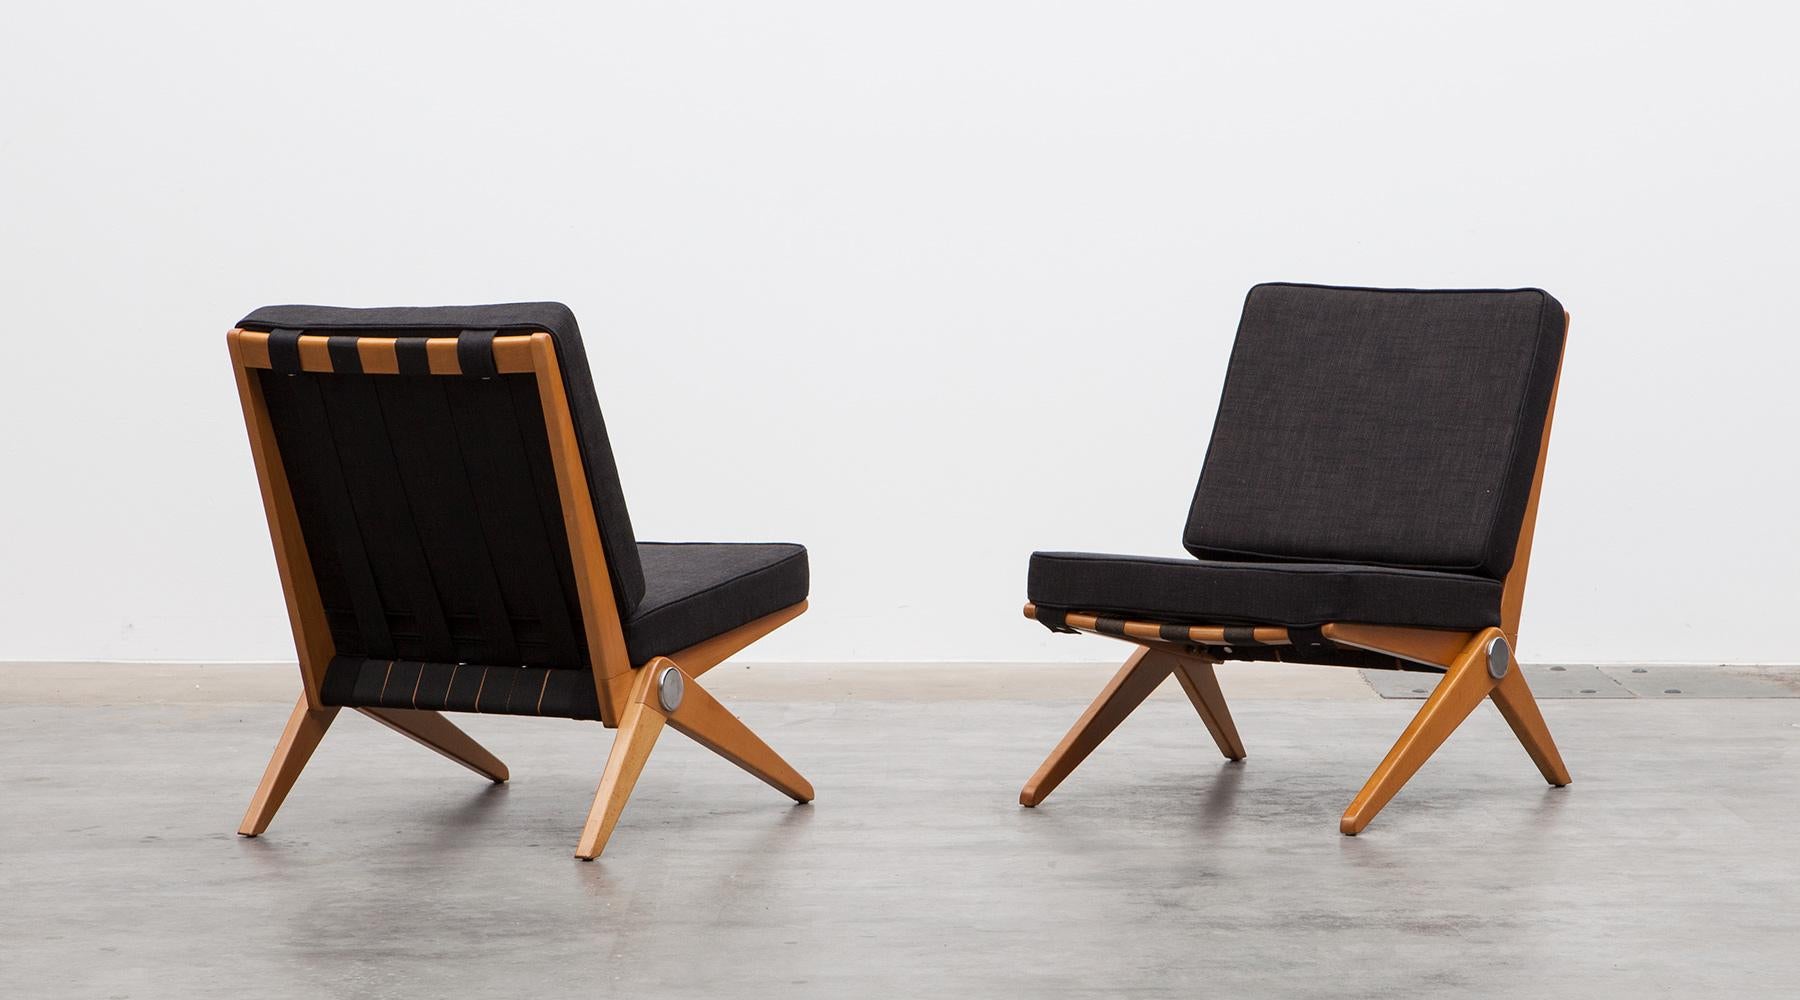 Pair of easy chairs designed by Pierre Jeanneret in teak, USA, 1952.

Set of subtle easy chairs with beautifully shaped wooden feet. The chairs are recently new upholstered in high-quality fabric and comes in perfect condition. Manufactured by